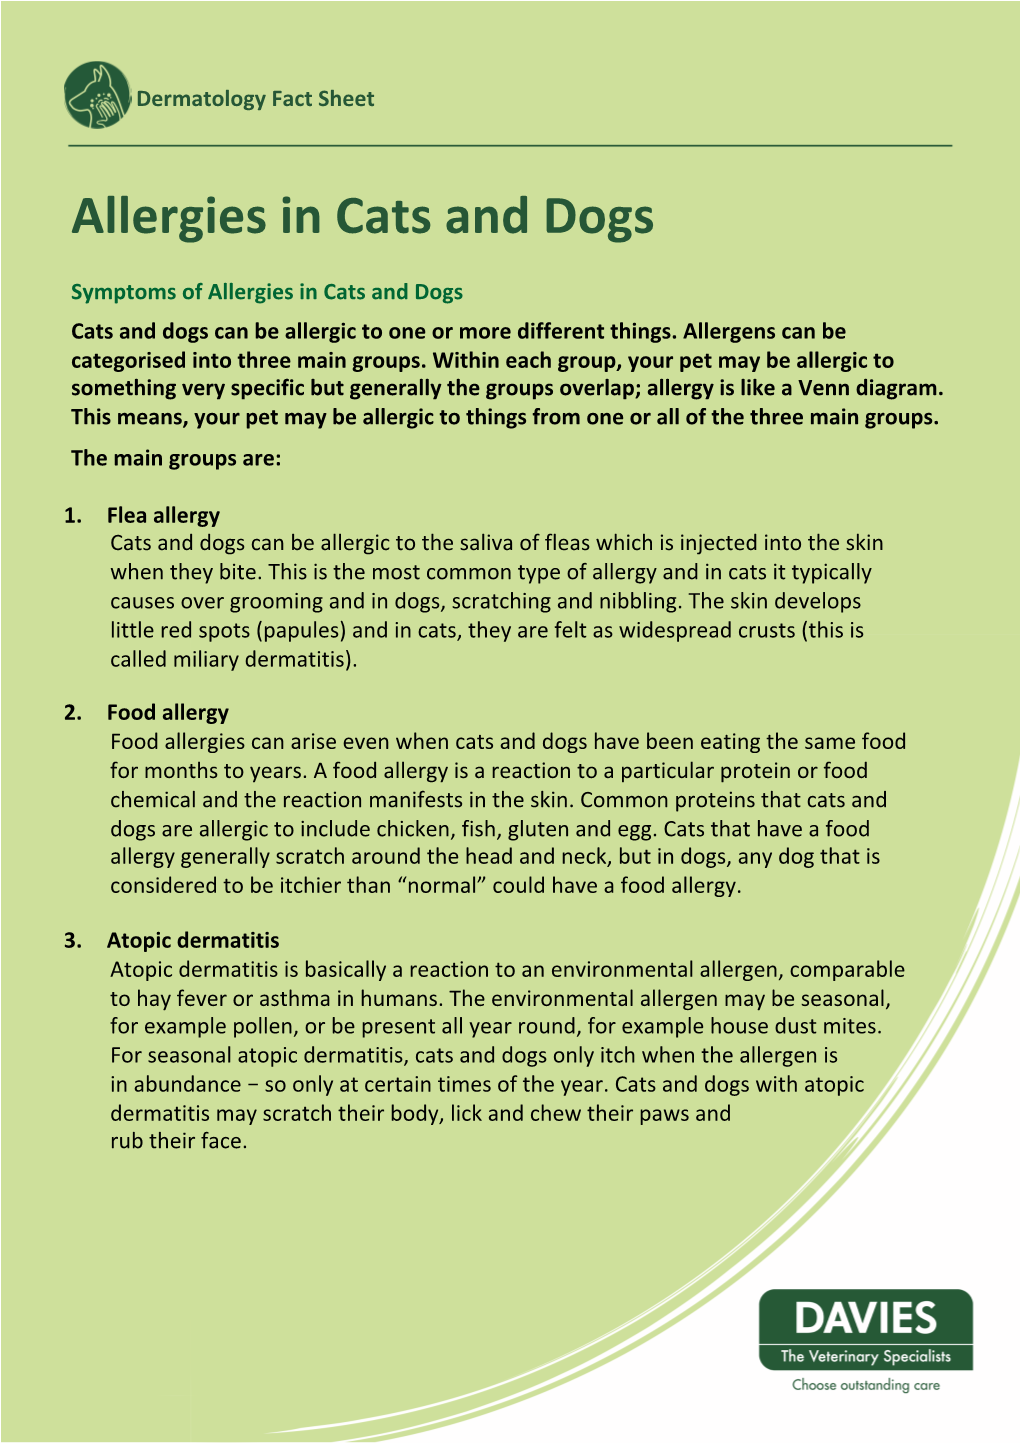 Davies Veterinary Specialists Allergies in Cats and Dogs Fact